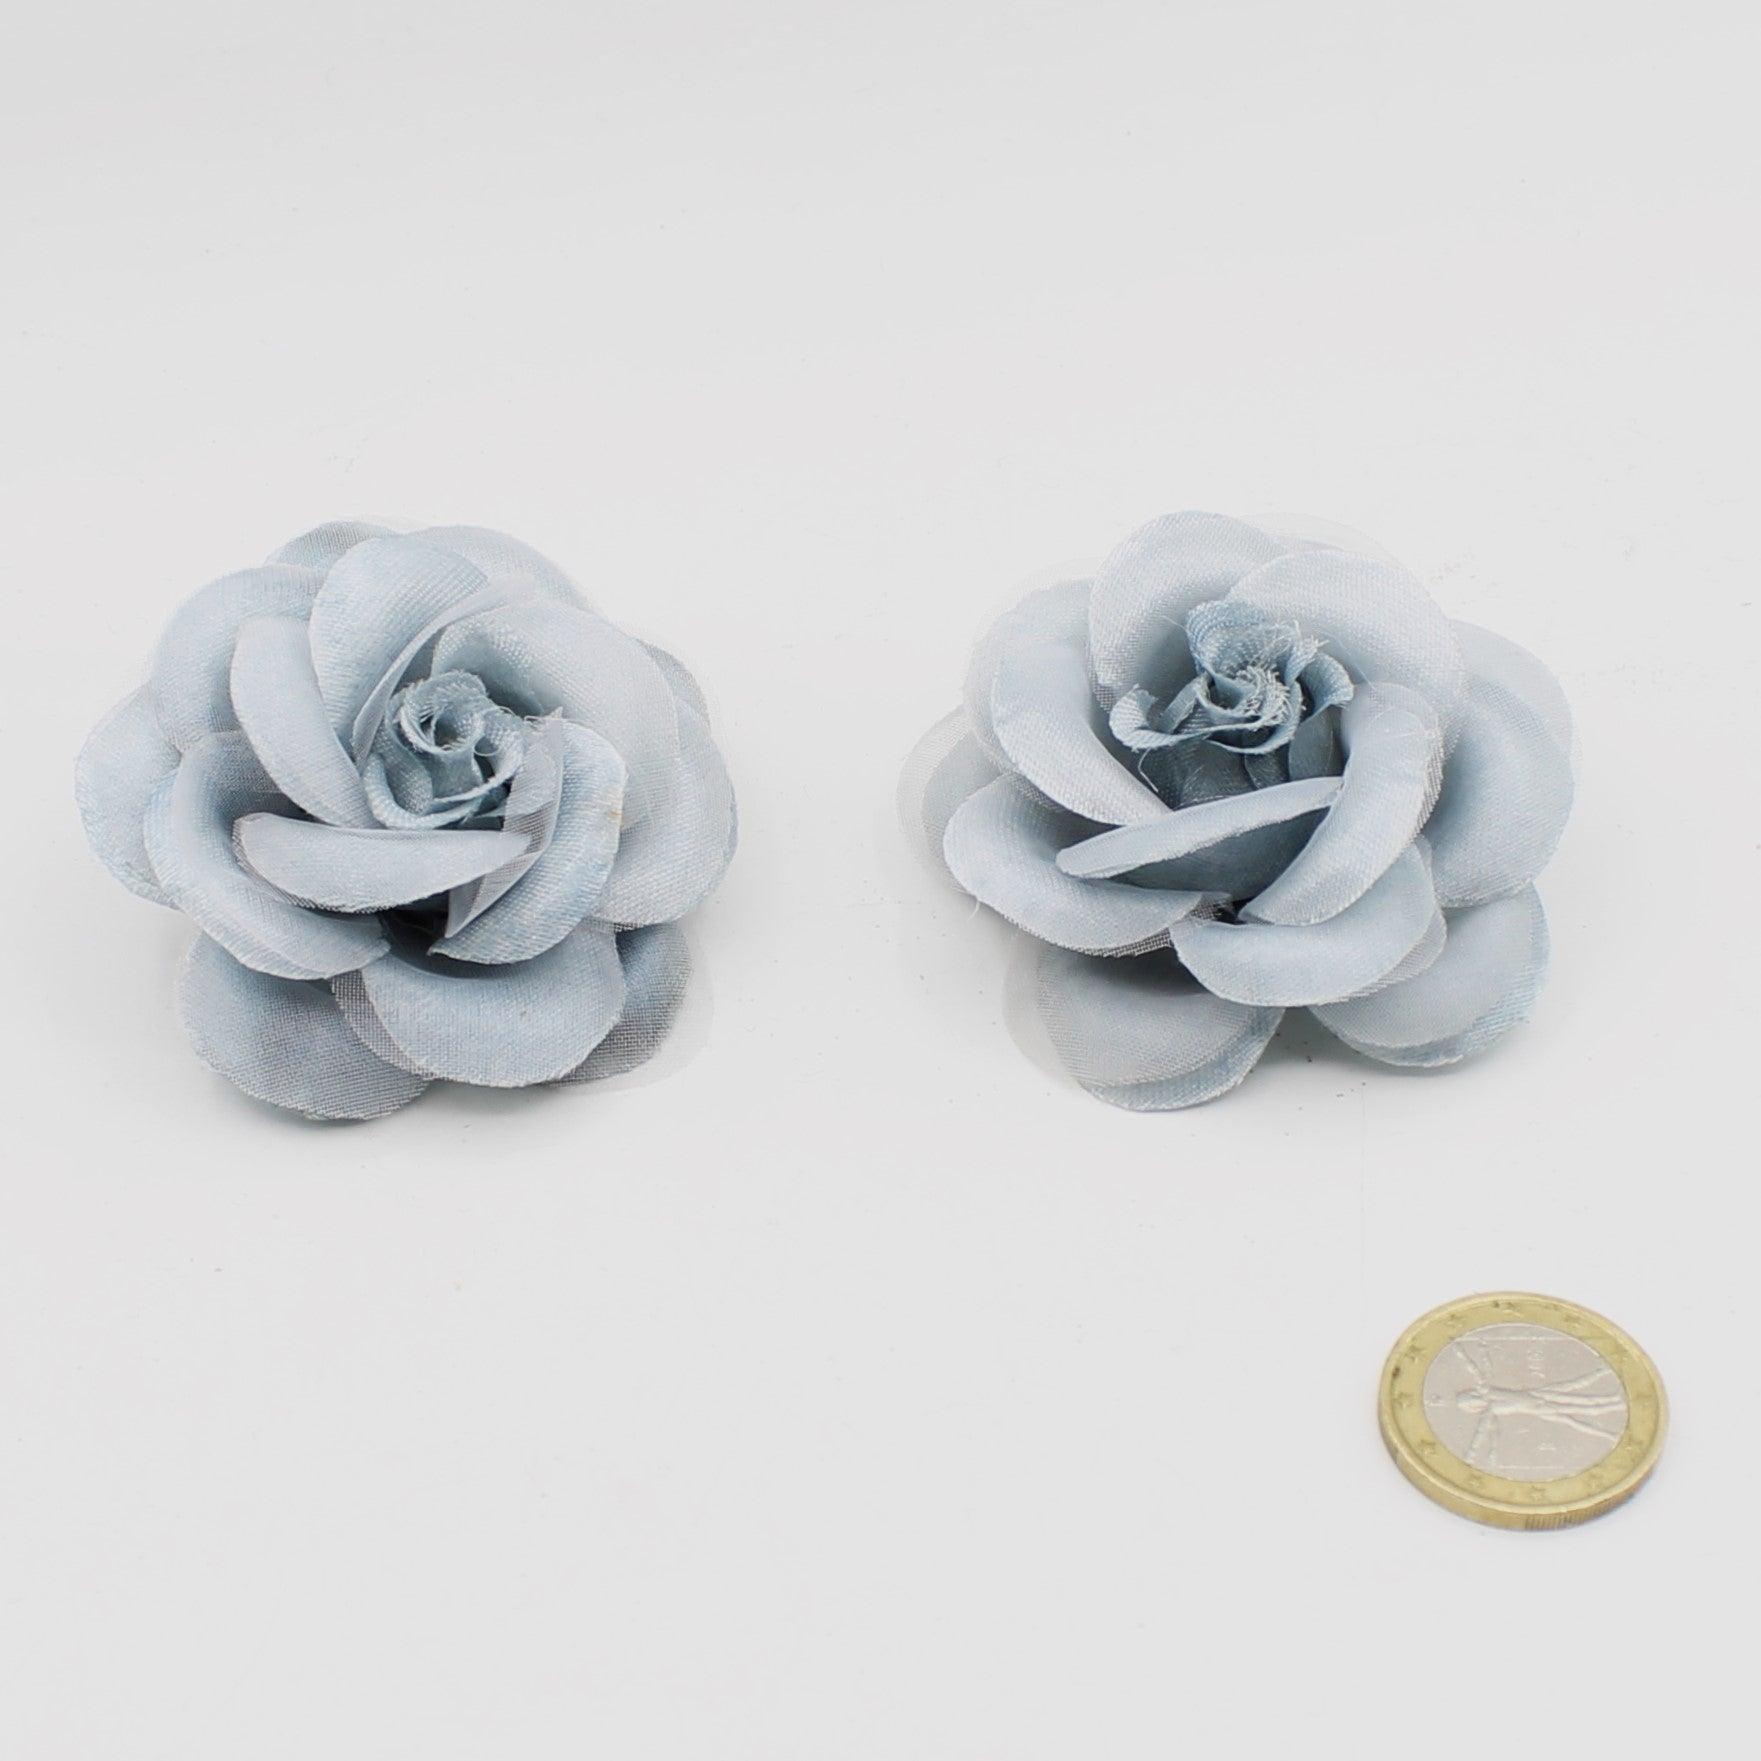 2 Mini Floral Brooches in Tulle and Satin with Safety Pin, 6cm, Blue or Beige Color with Glitter-ACCESSOIRSE LEDUC